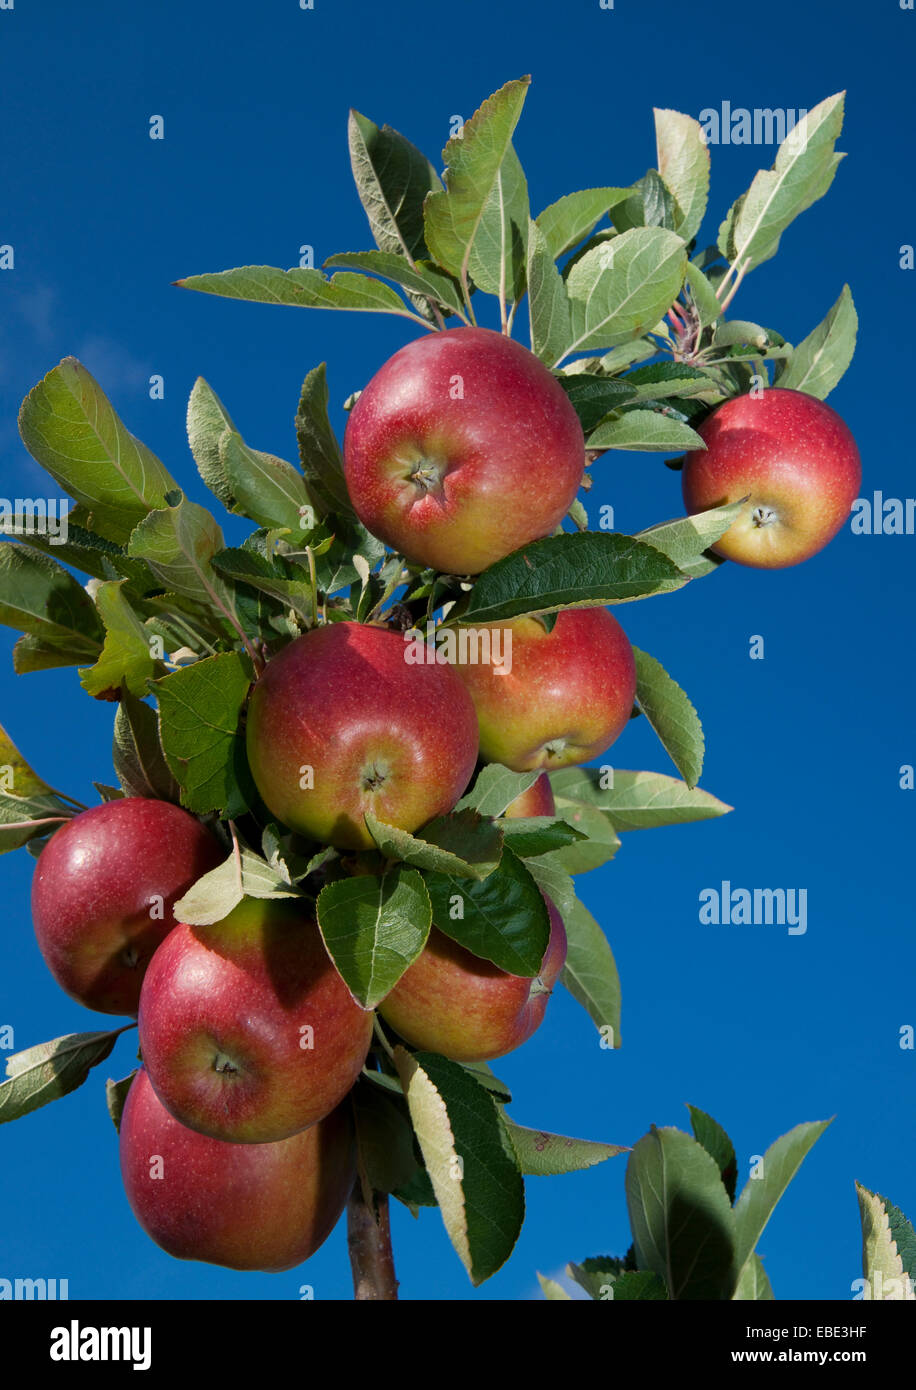 Close-up of red apples hanging from apple tree, Germany Stock Photo